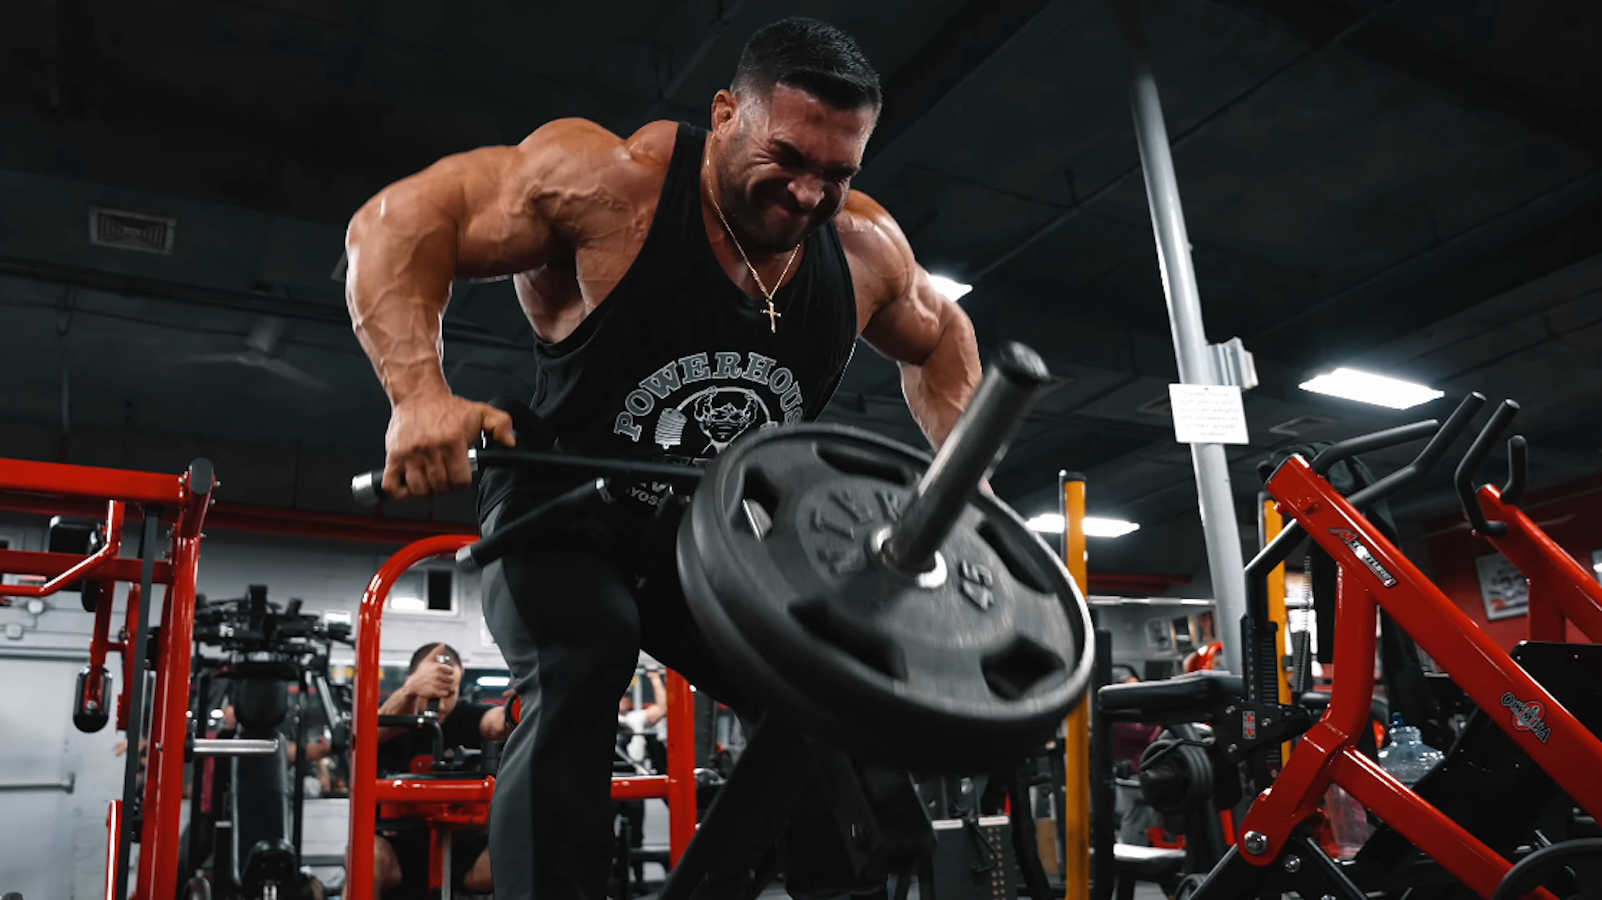 New Mr. Olympia Derek Lunsford Trains Back at Legendary Bev Francis  Powerhouse Gym - Breaking Muscle